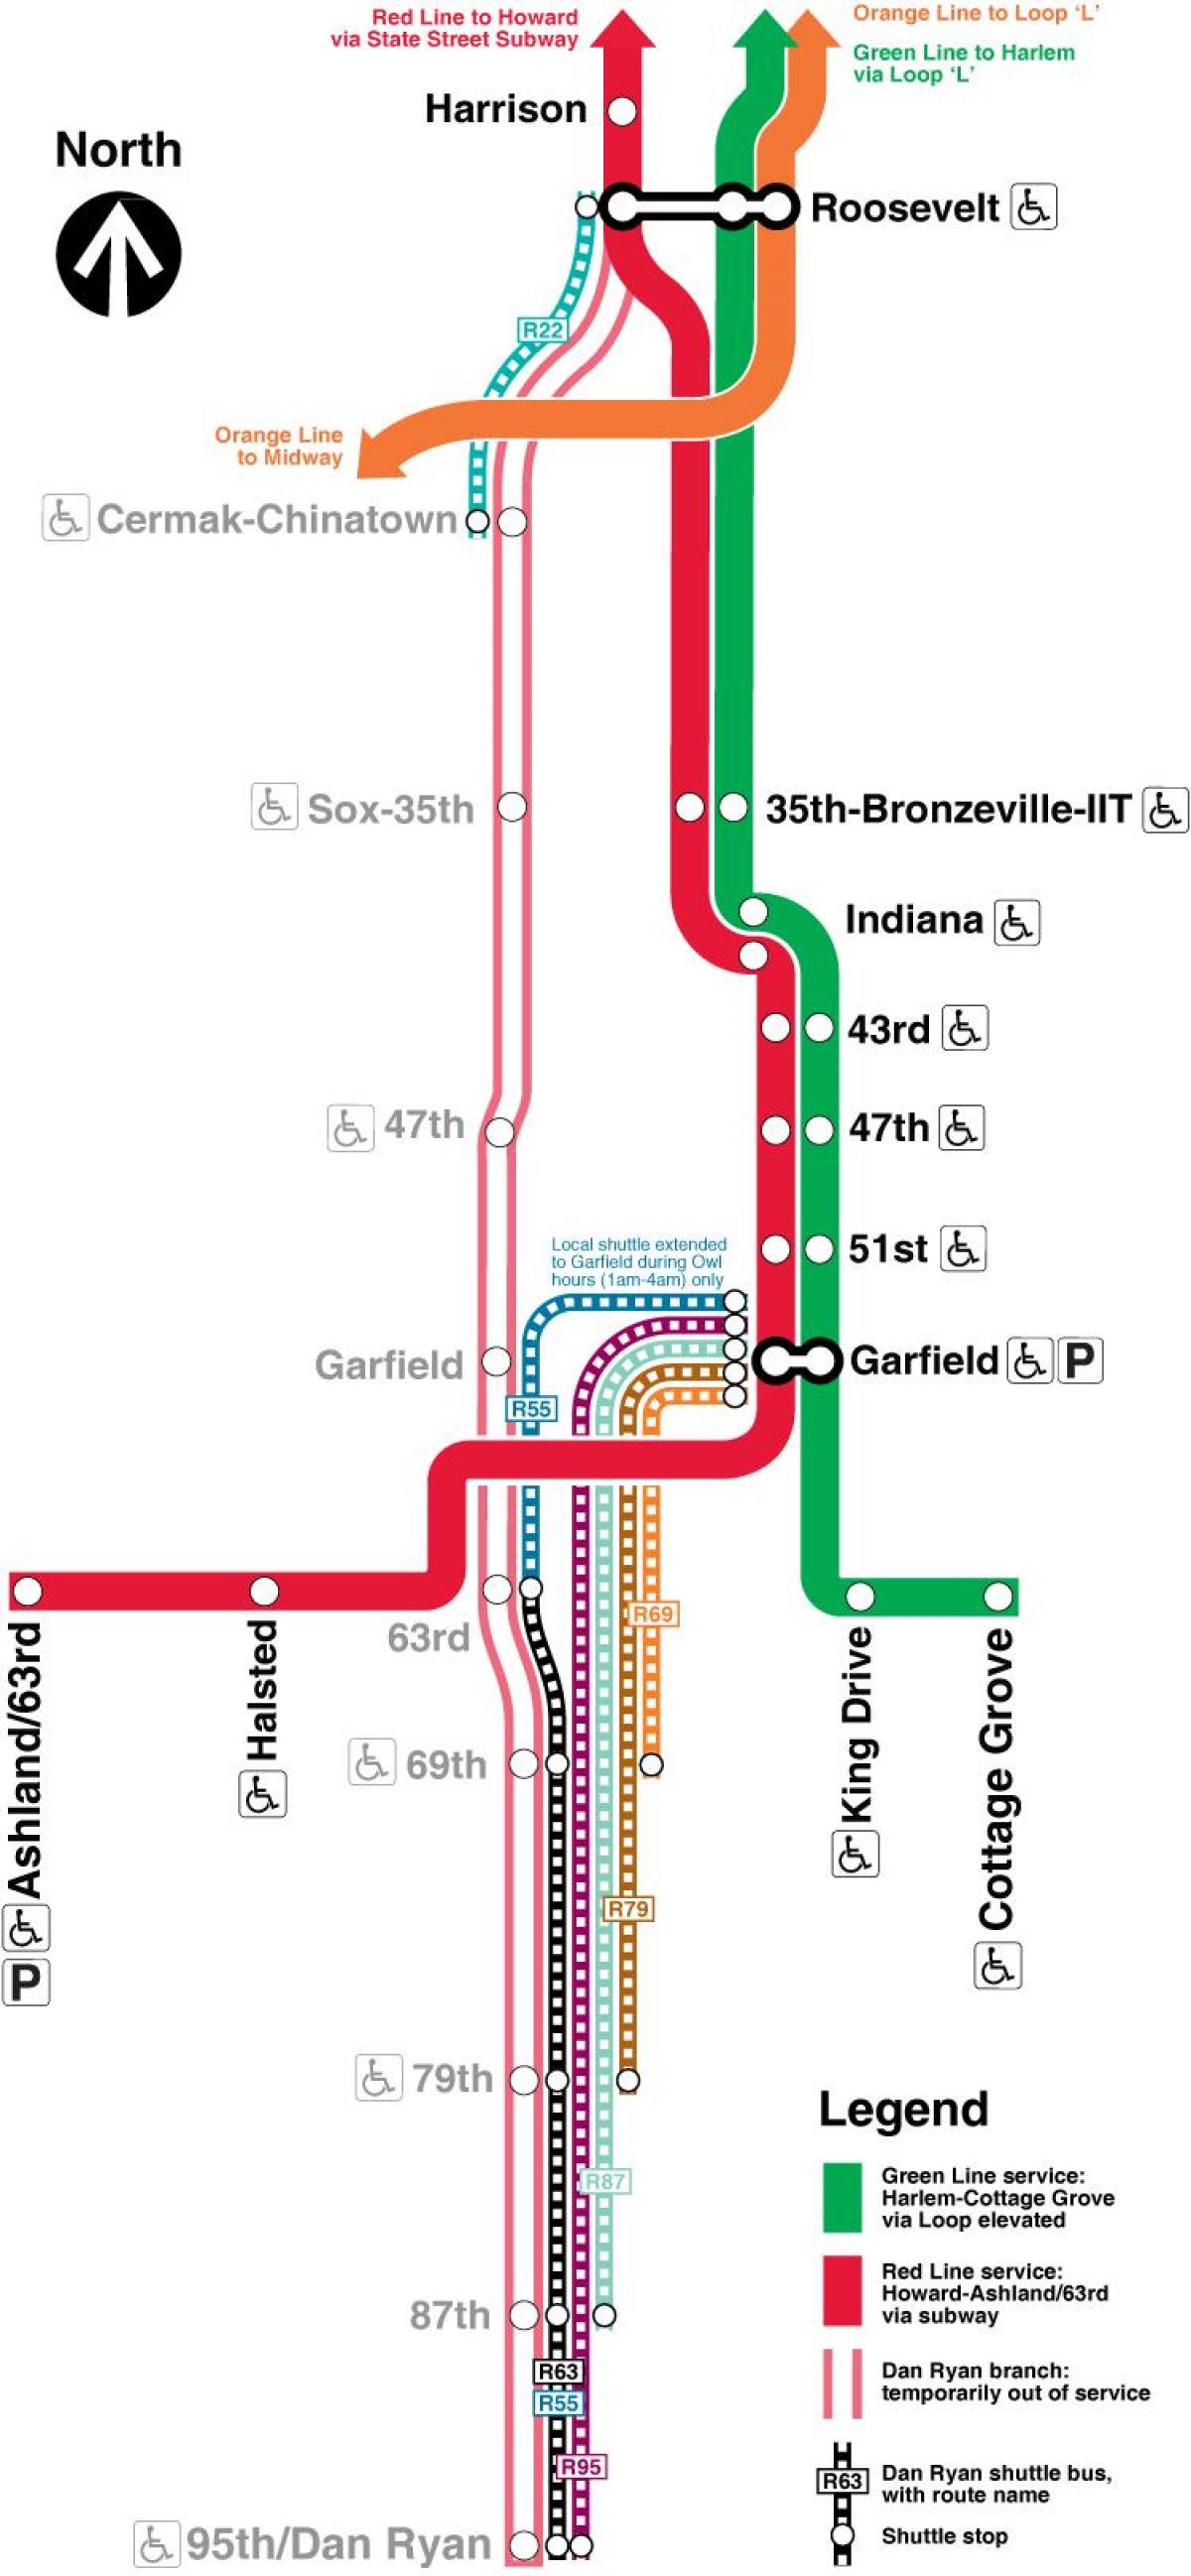 Chicago subway map red line